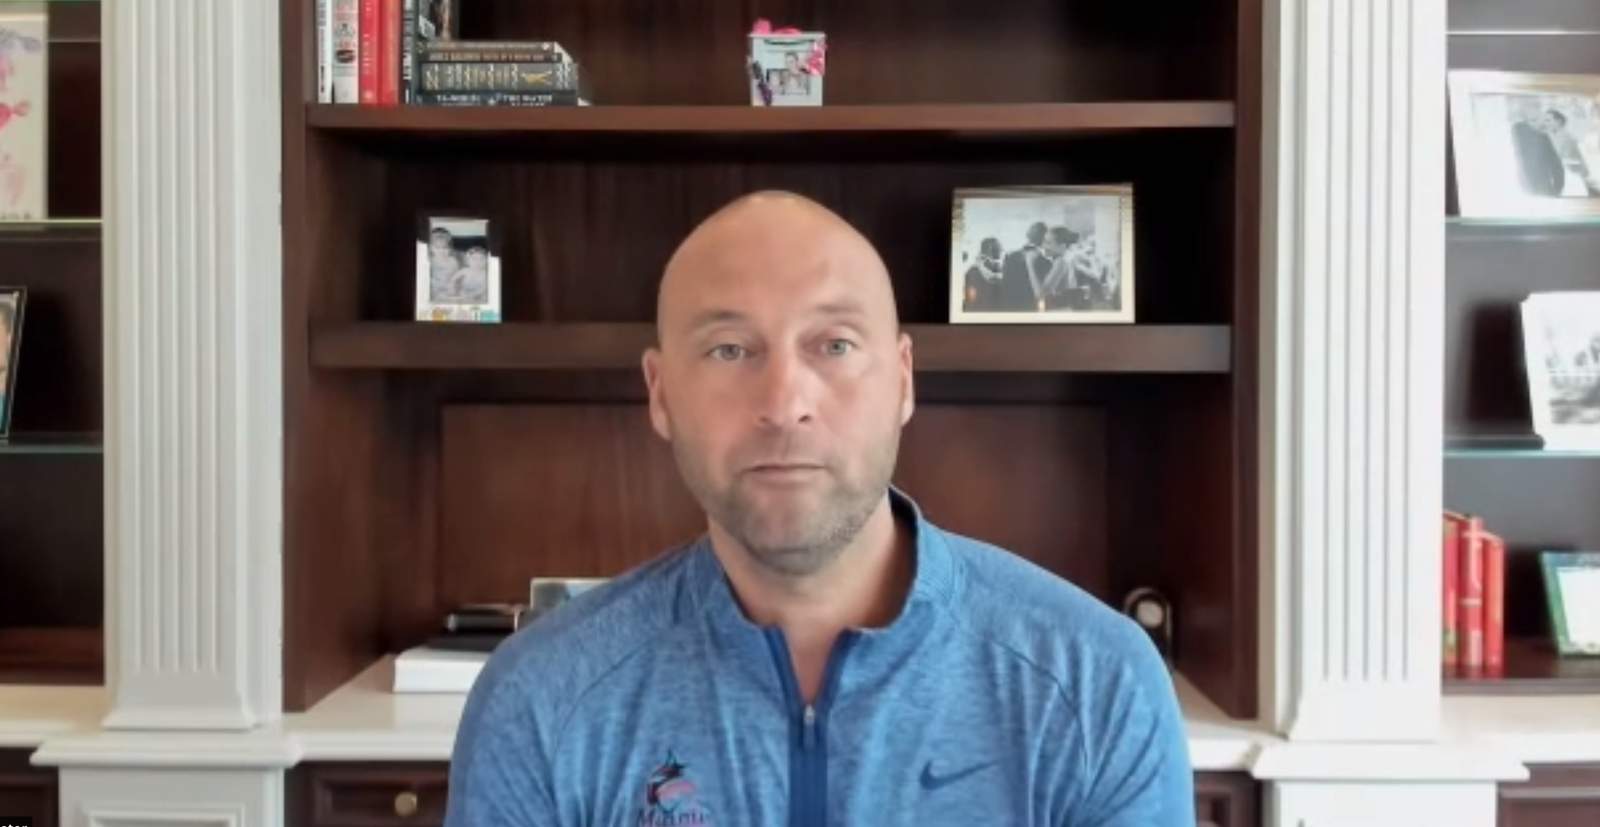 Miami Marlins CEO Derek Jeter reacts to All-Star Game being moved from Georgia